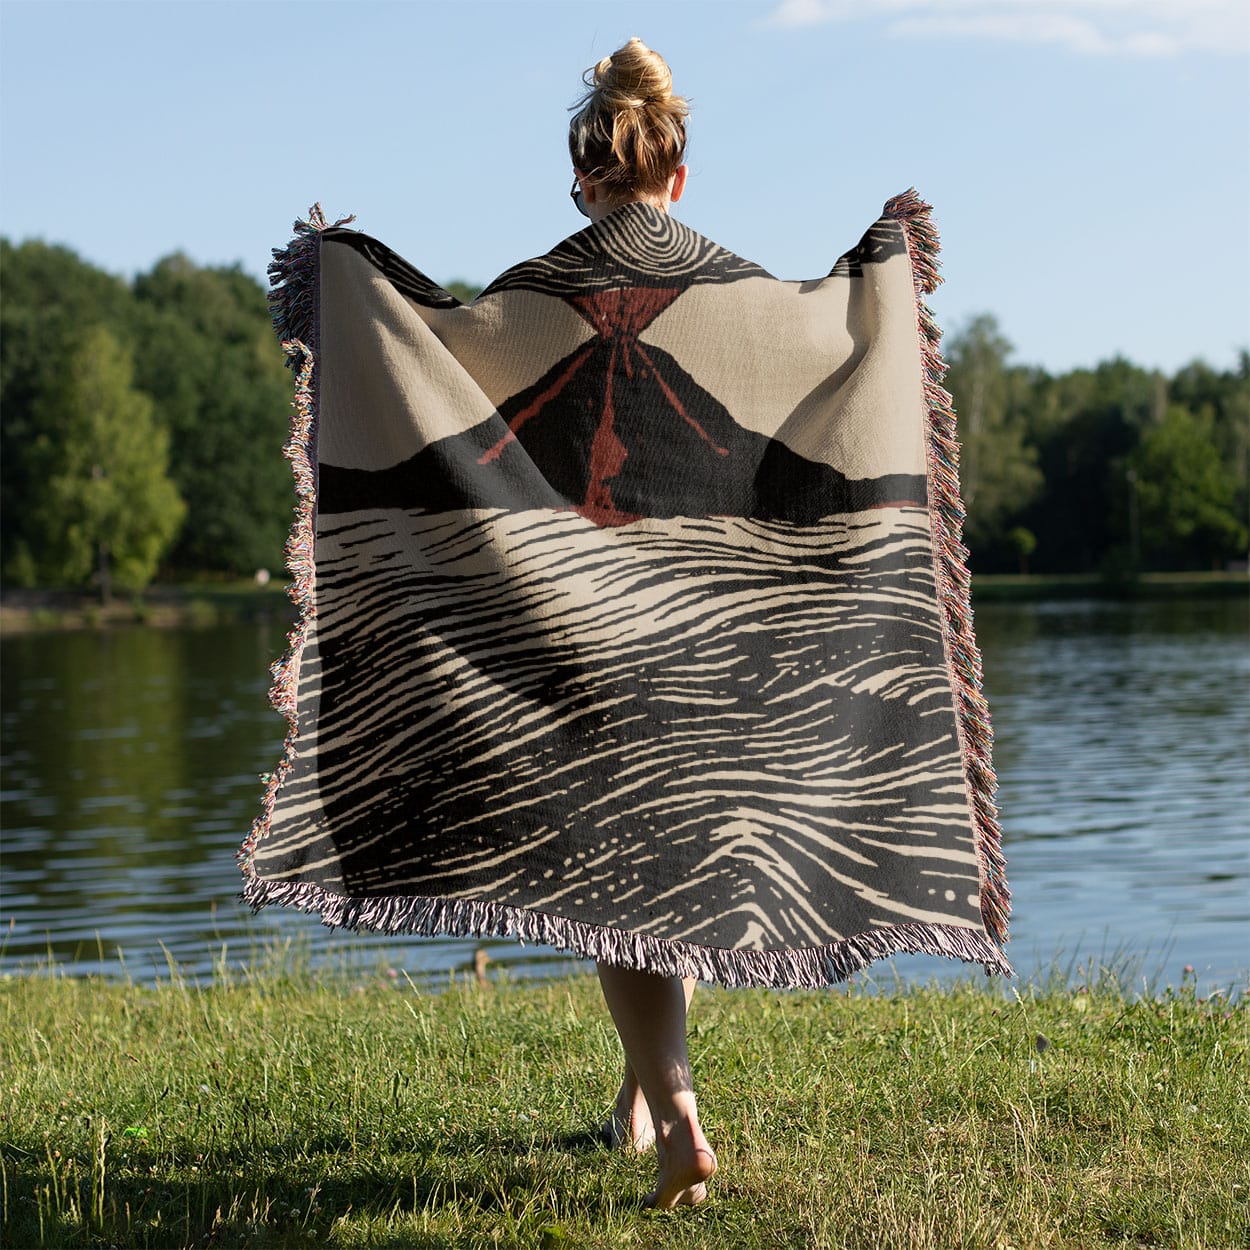 Cool Volcano Drawing Woven Blanket Held on a Woman's Back Outside